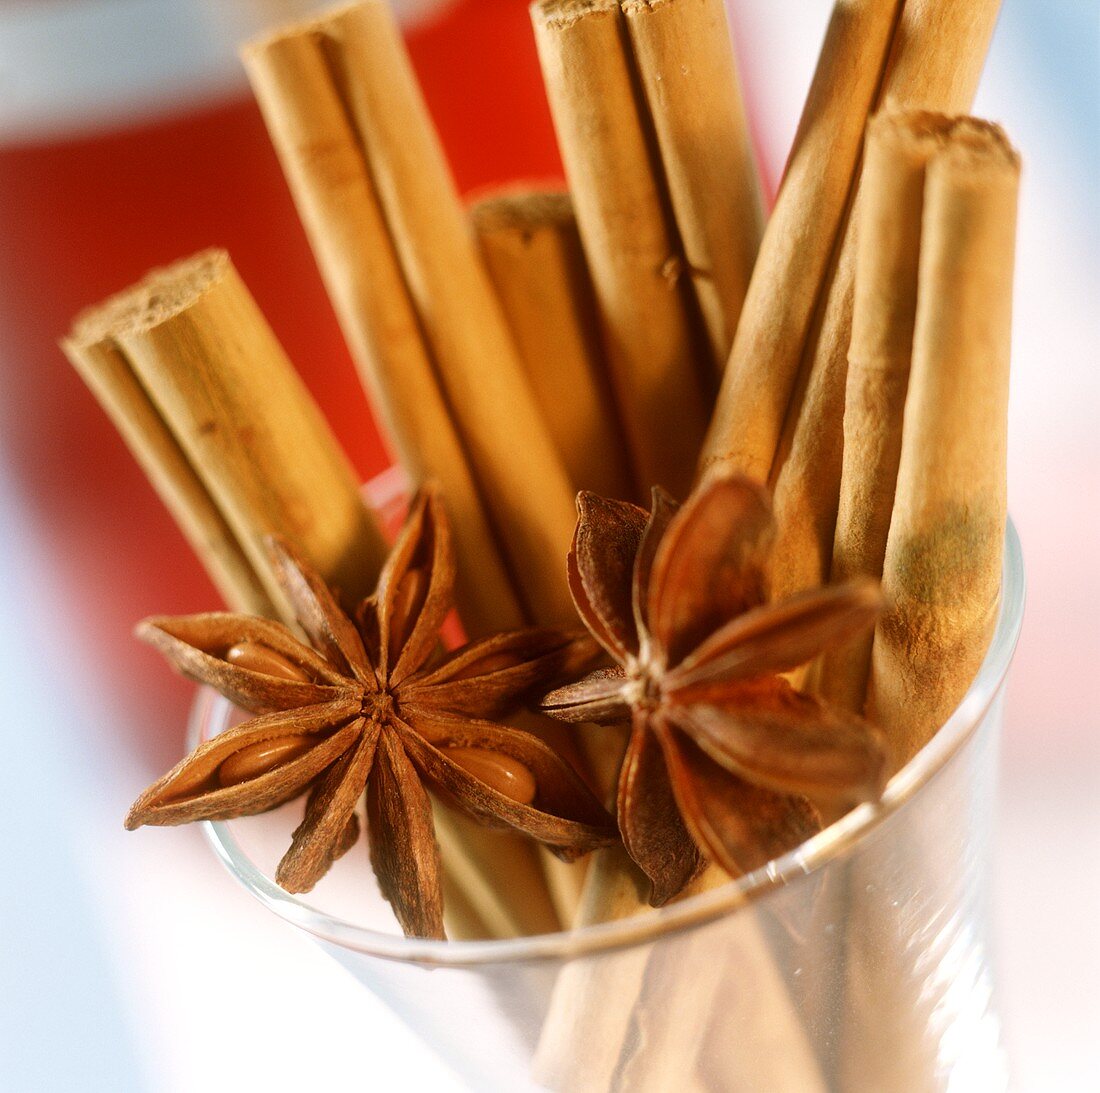 Cinnamon sticks and star anise in a glass